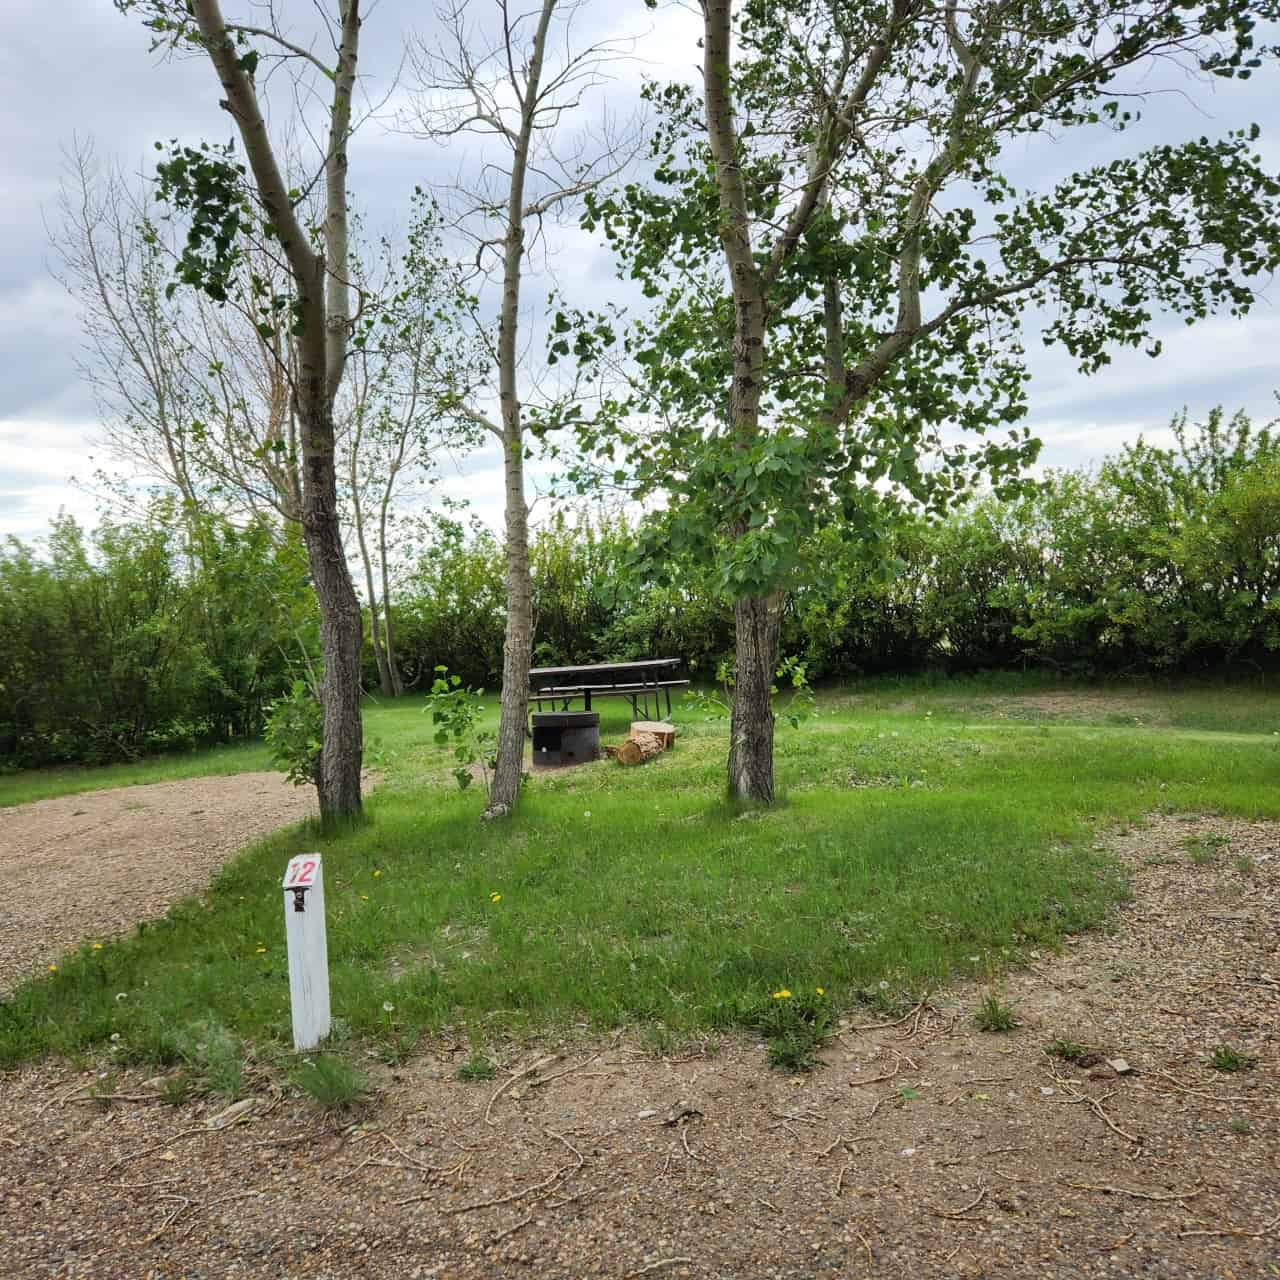 Camping in Cypress County at Cavan Lake - Campsites all have picnic tables and fire pits available. Some are fantastic for tents as they have lovely soft grassy areas